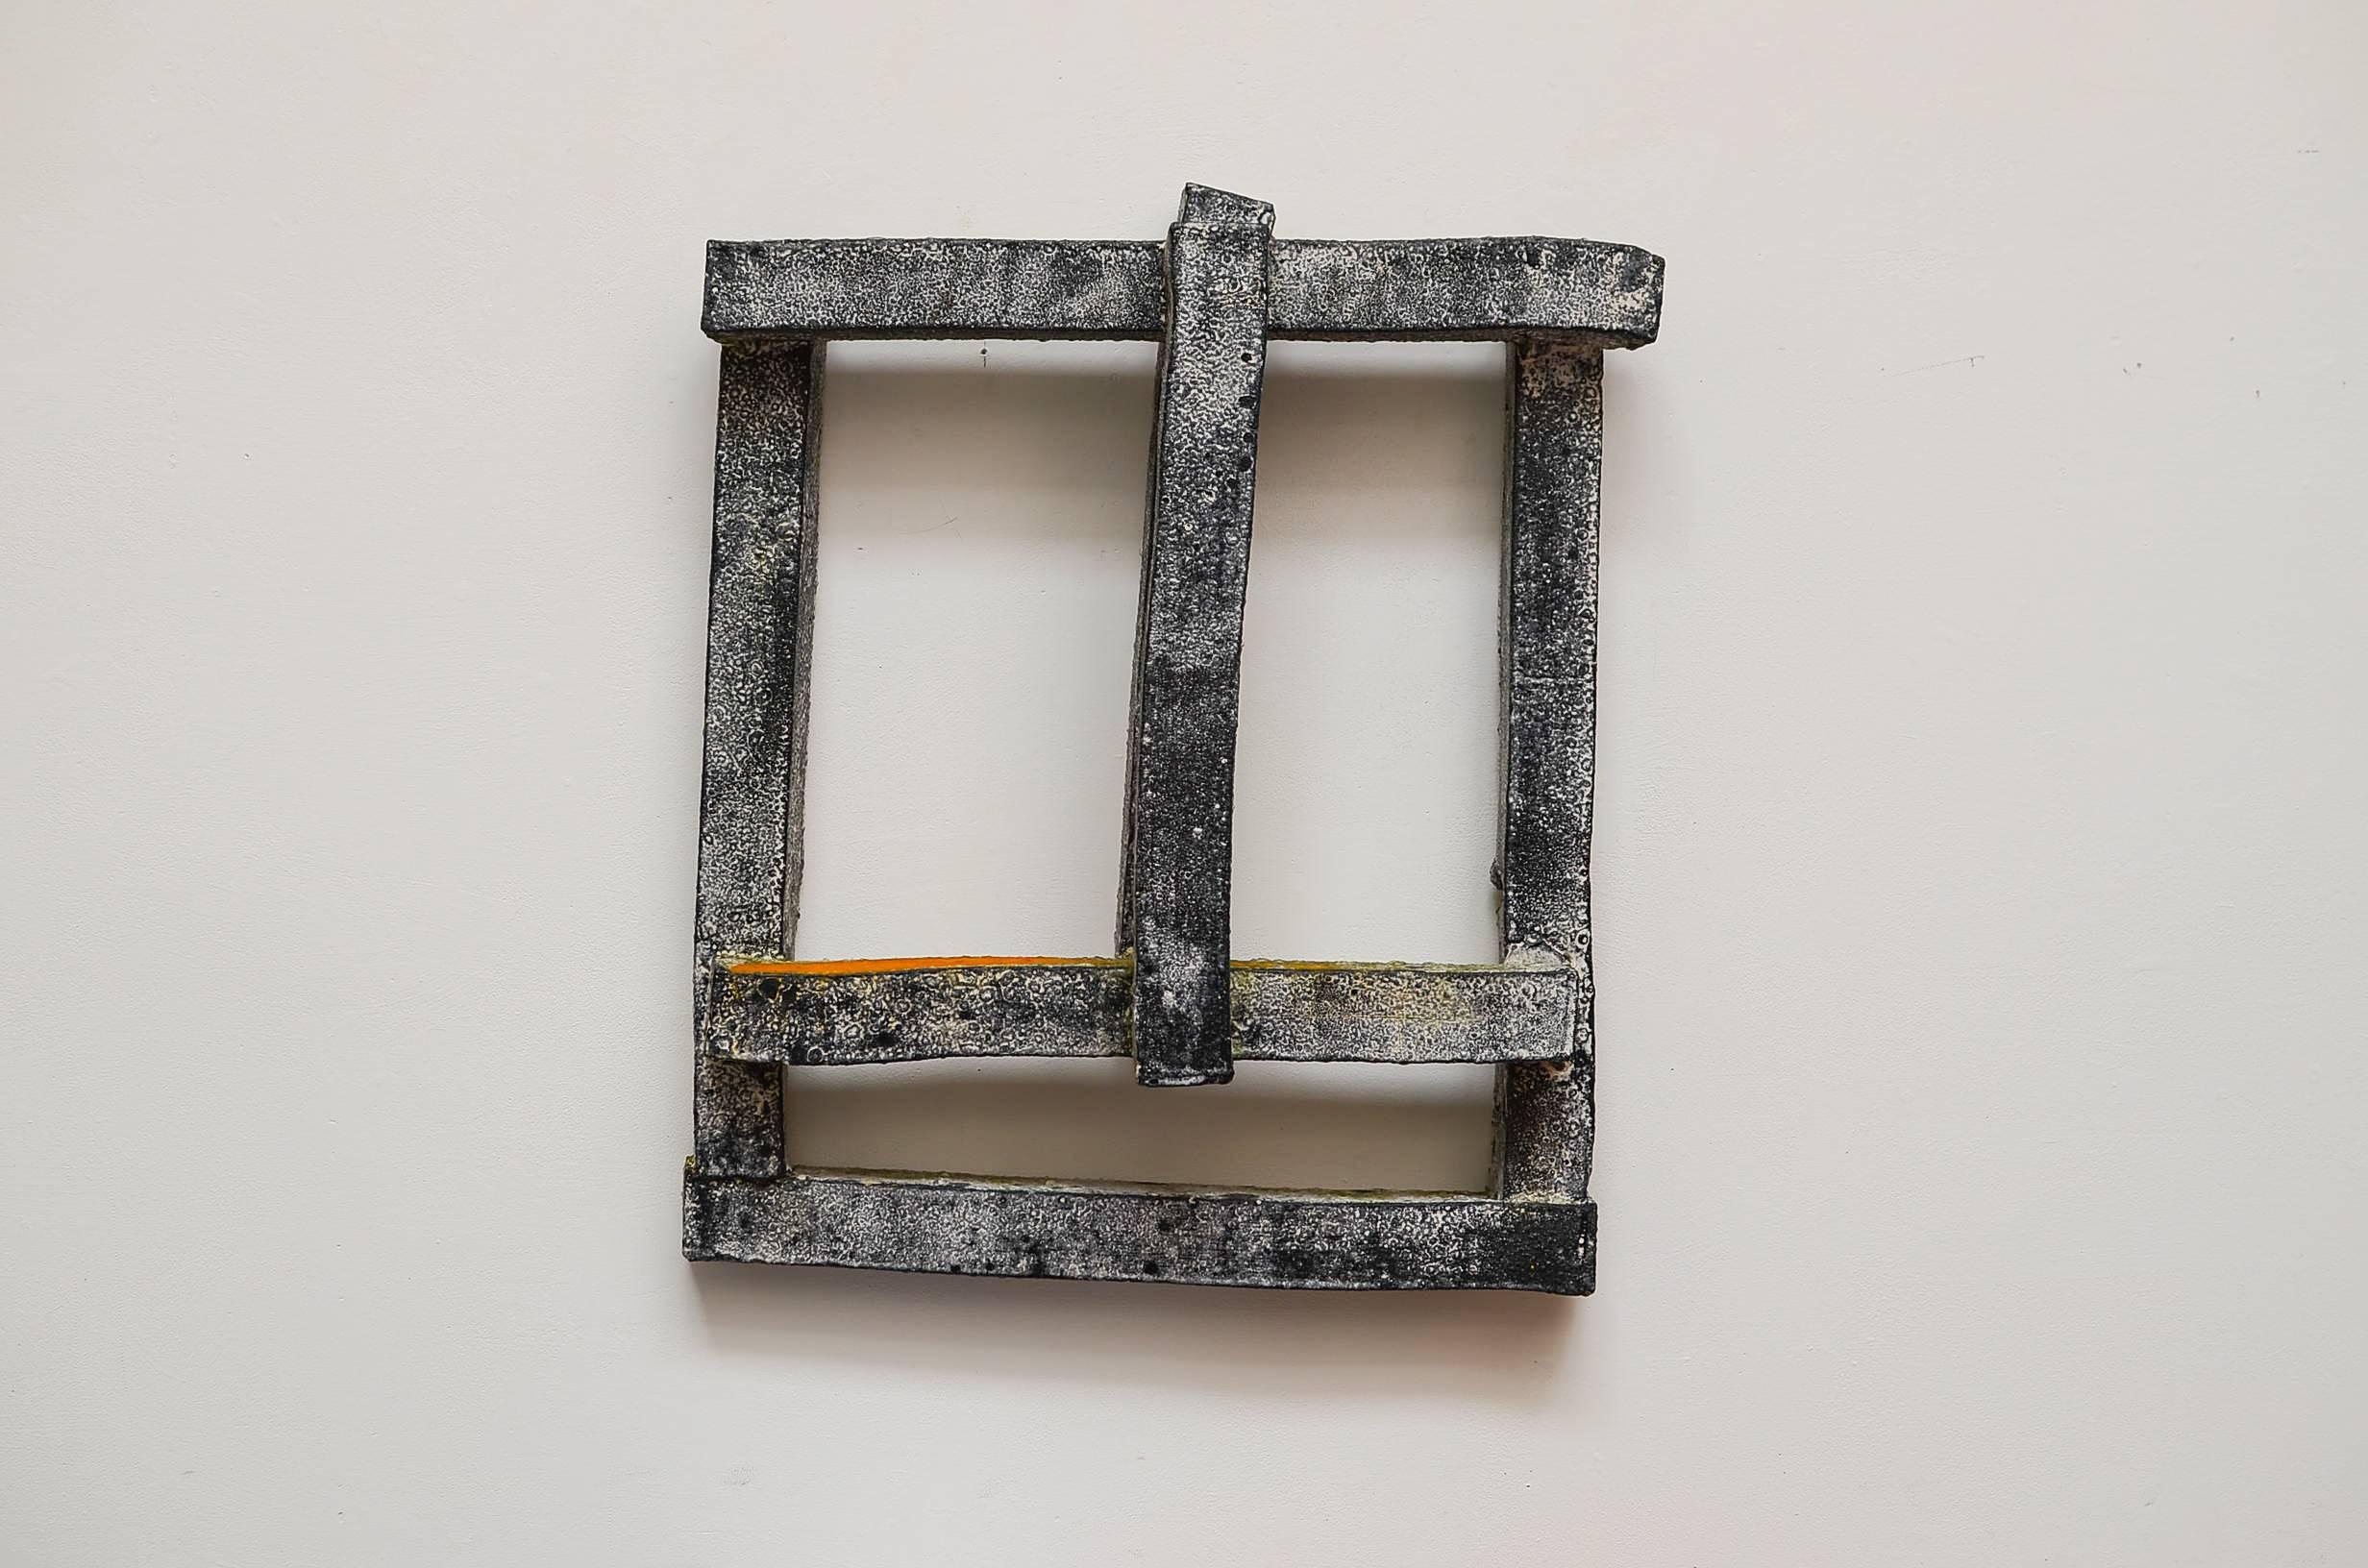 Clay Robert Brady Untitled #56 Ceramic Wall Sculpture, 2005 For Sale